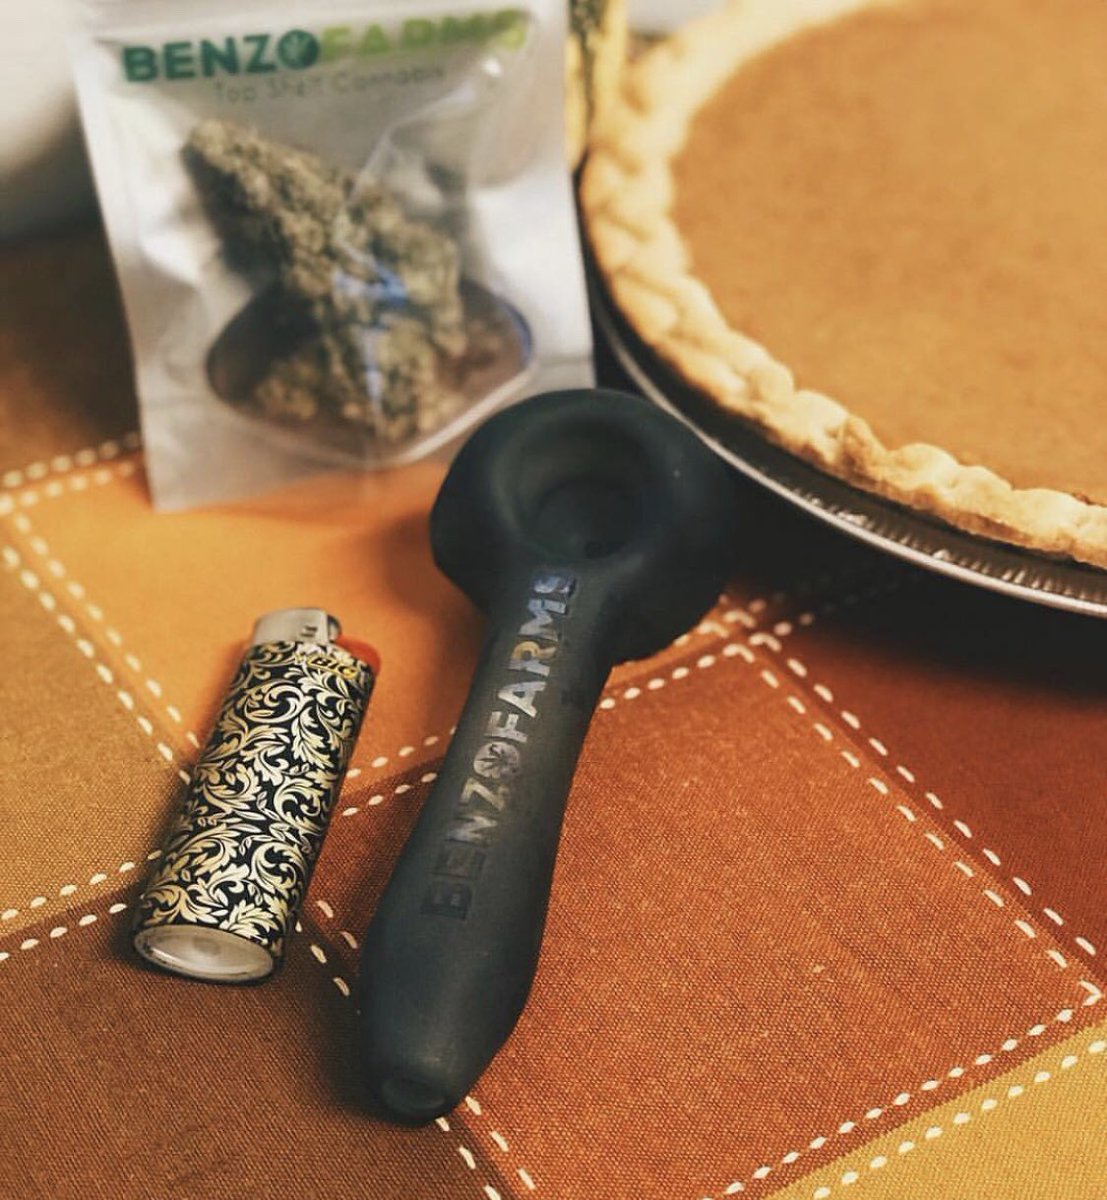 Happy Danksgiving, family. A day where not just the stoners are baked, but the pies are too. #happydanksgiving #danksgiving #happythanksgiving #benzofarms #pnwstoners #pnw #washingtonstoners #weed #cannabis #mmj #successfulstoners #i502 #marijuana #Ganja #Stoner